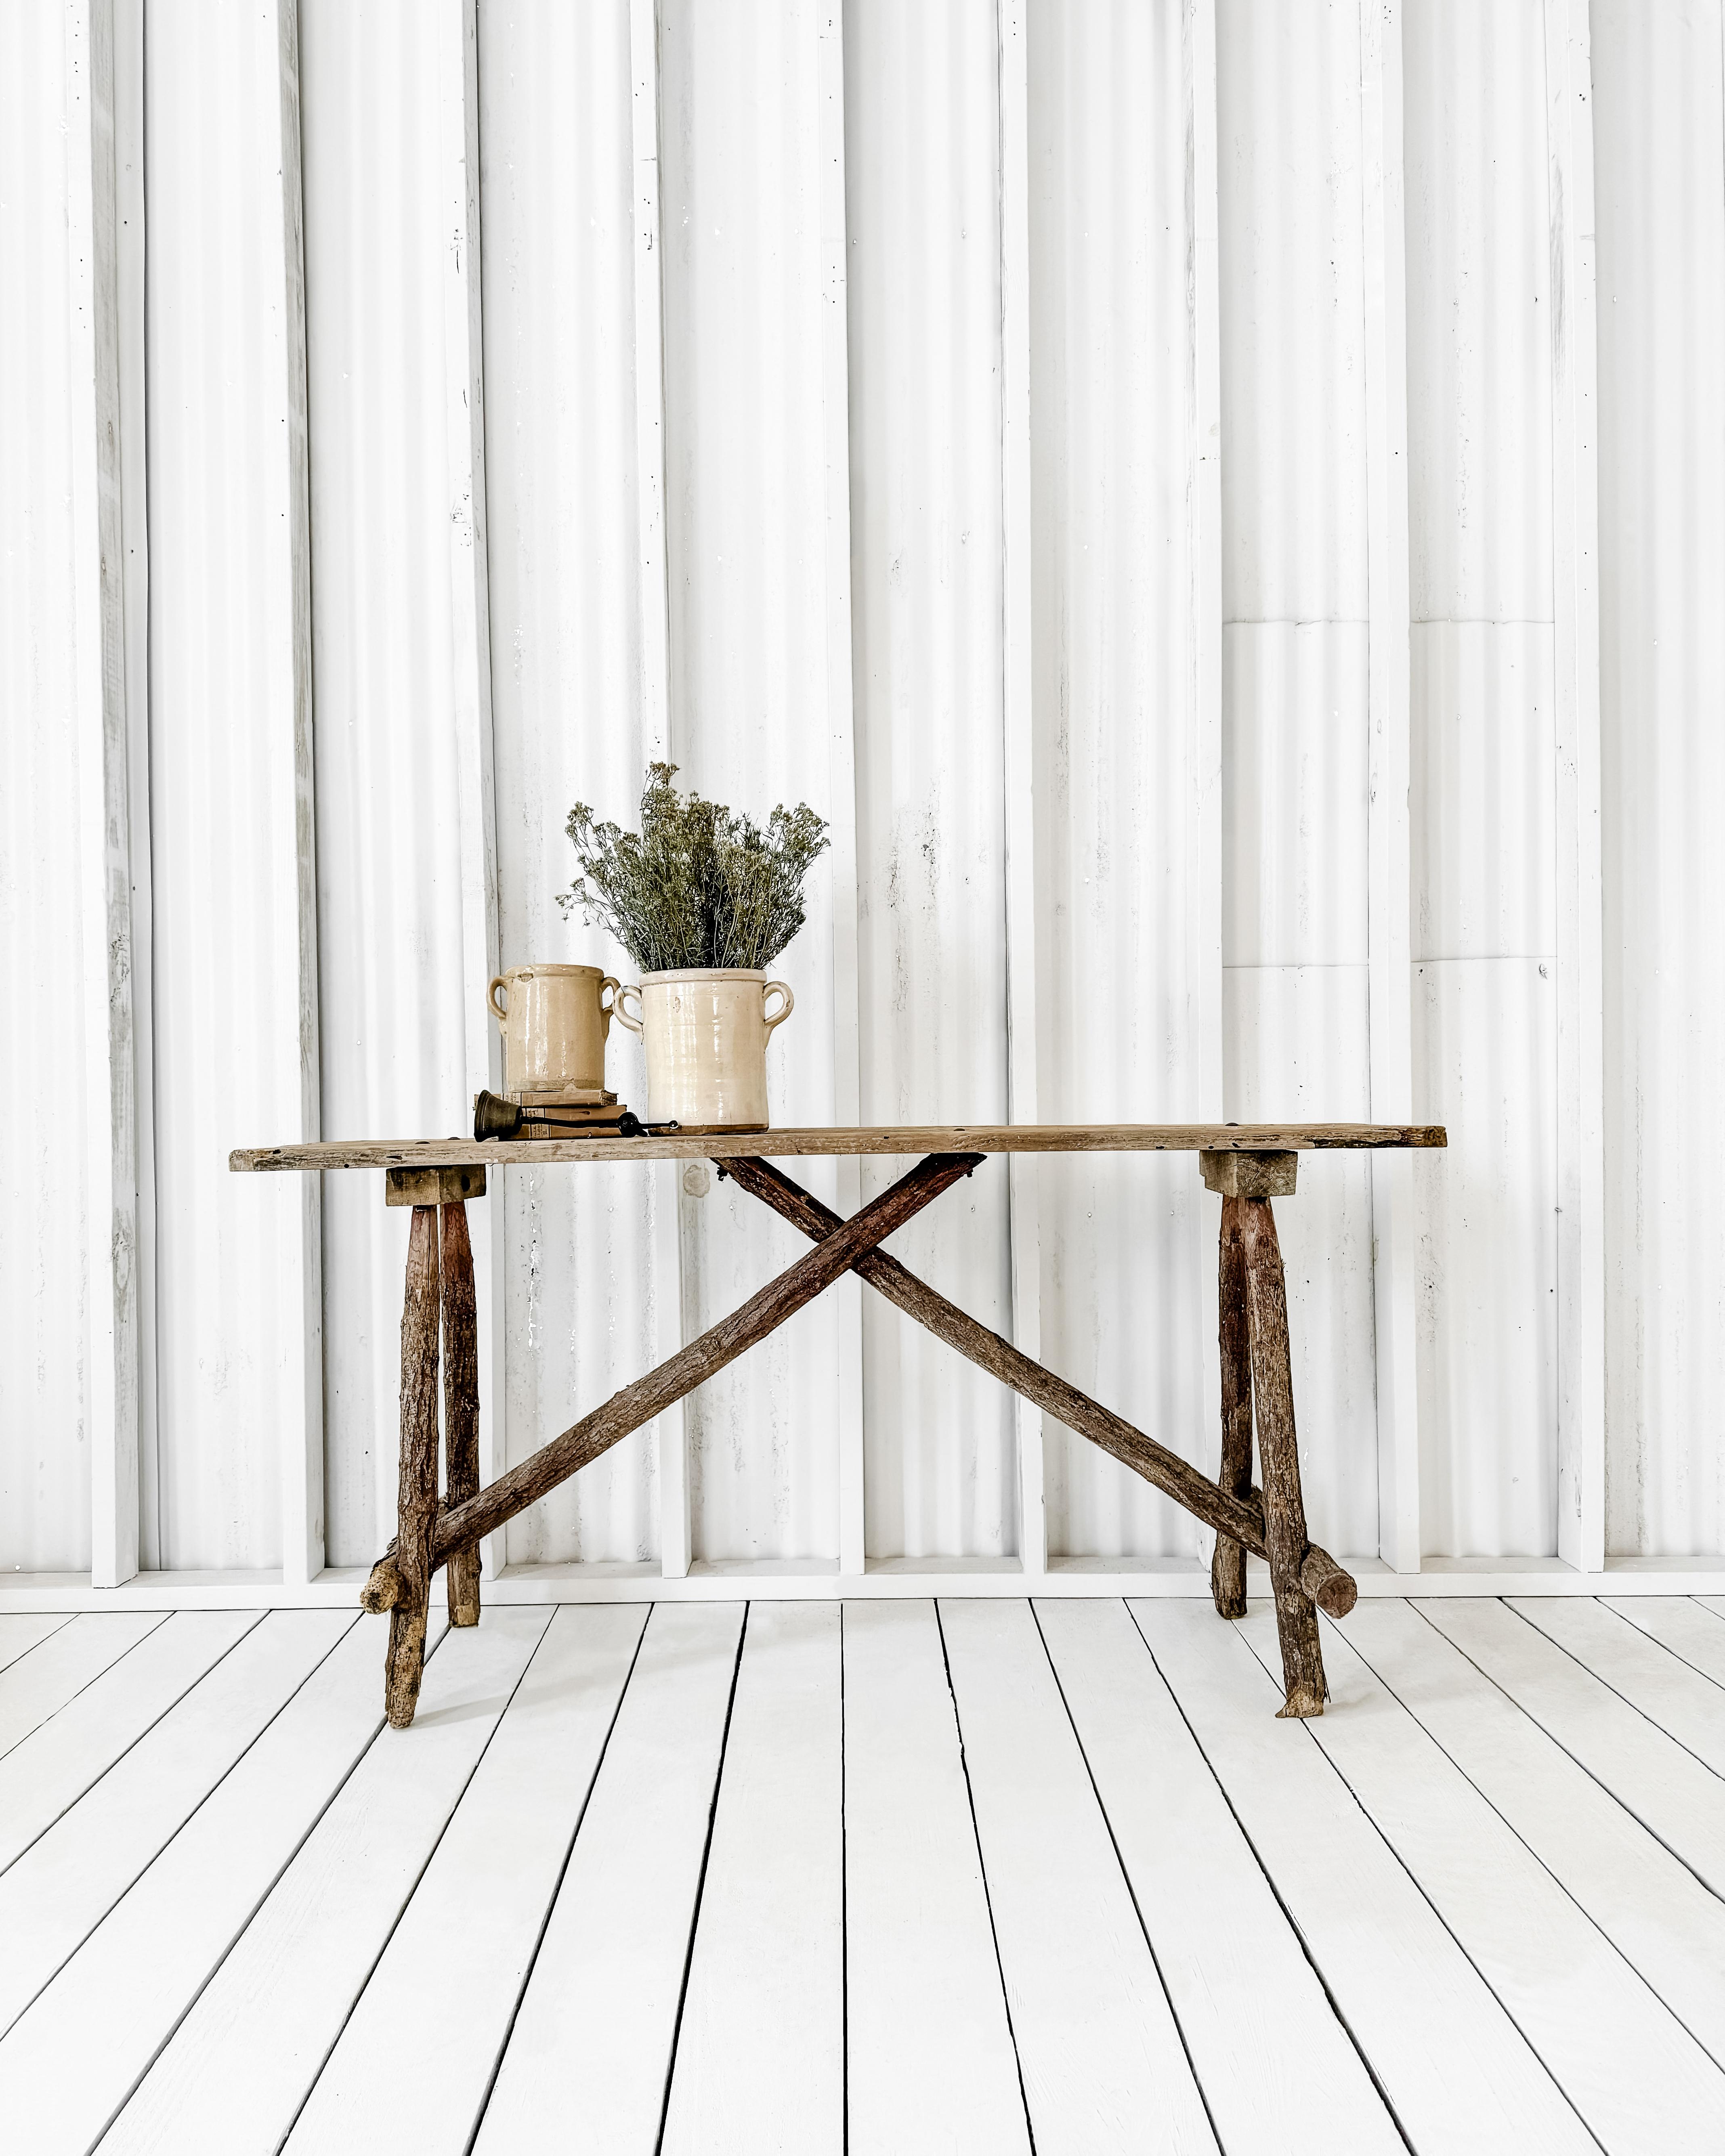 Rustic French laundry table featuring a single board top. A popular tool used for washing clothes in the French countryside, the handcrafted table boasts A-frame legs constructed from tree branches. Worn and weathered with a beautiful patina, the